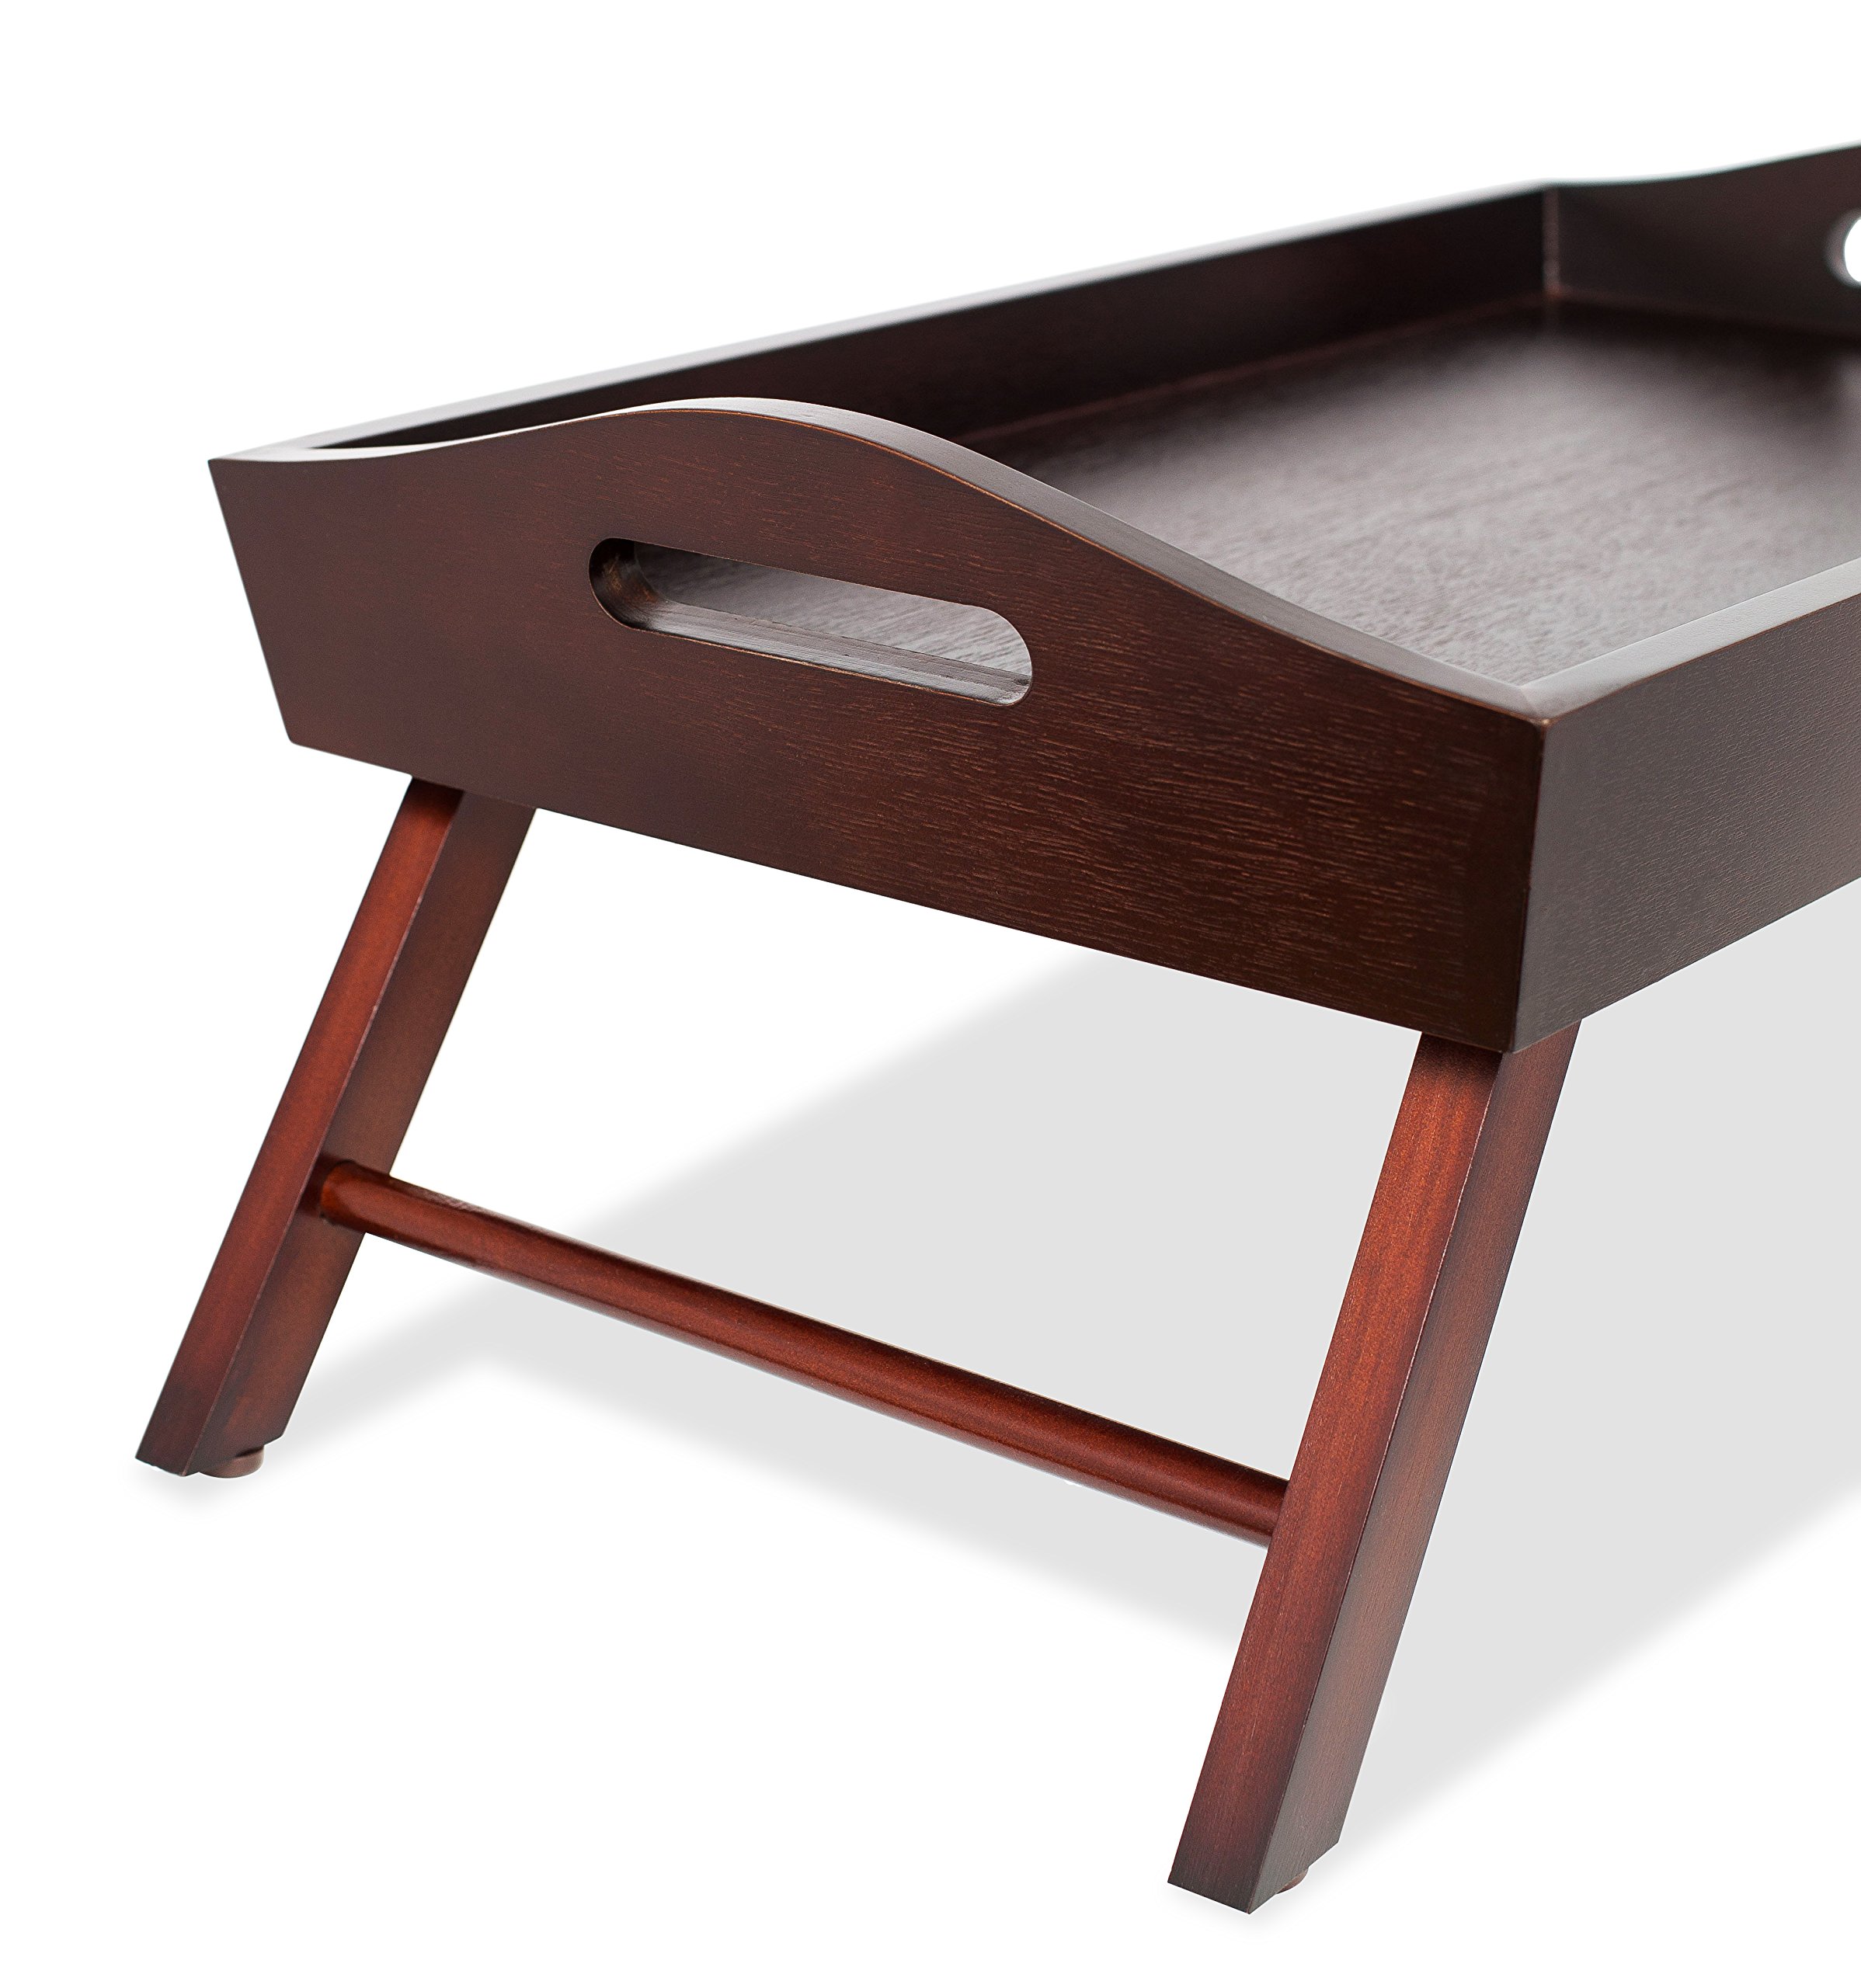 BirdRock Home Wood Bed Tray with Folding Legs - Wide Breakfast Serving Tray Lap Desk with Sides and Handles - Walnut